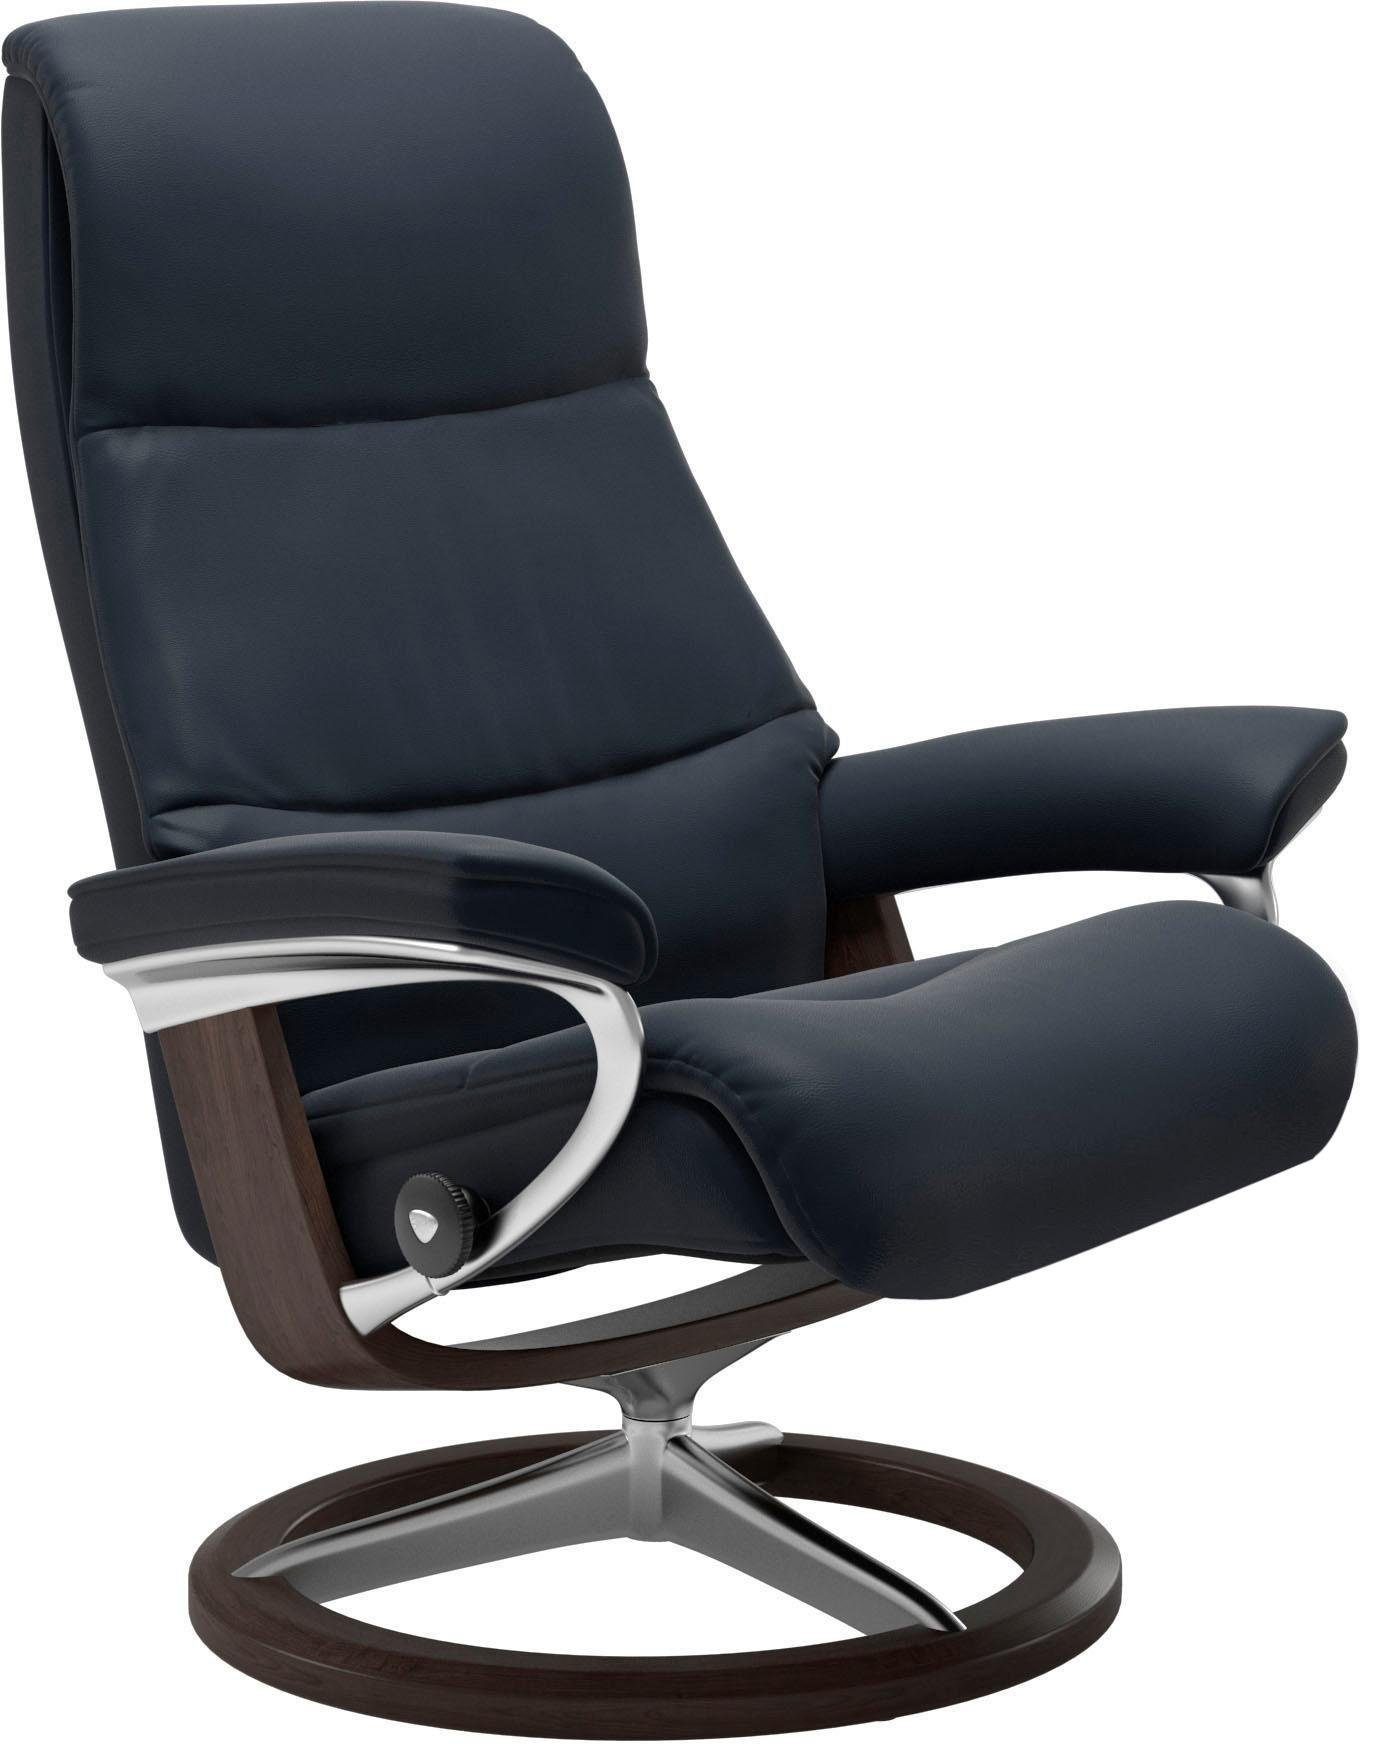 Base, Wenge Relaxsessel Größe View, Signature Stressless® S,Gestell mit